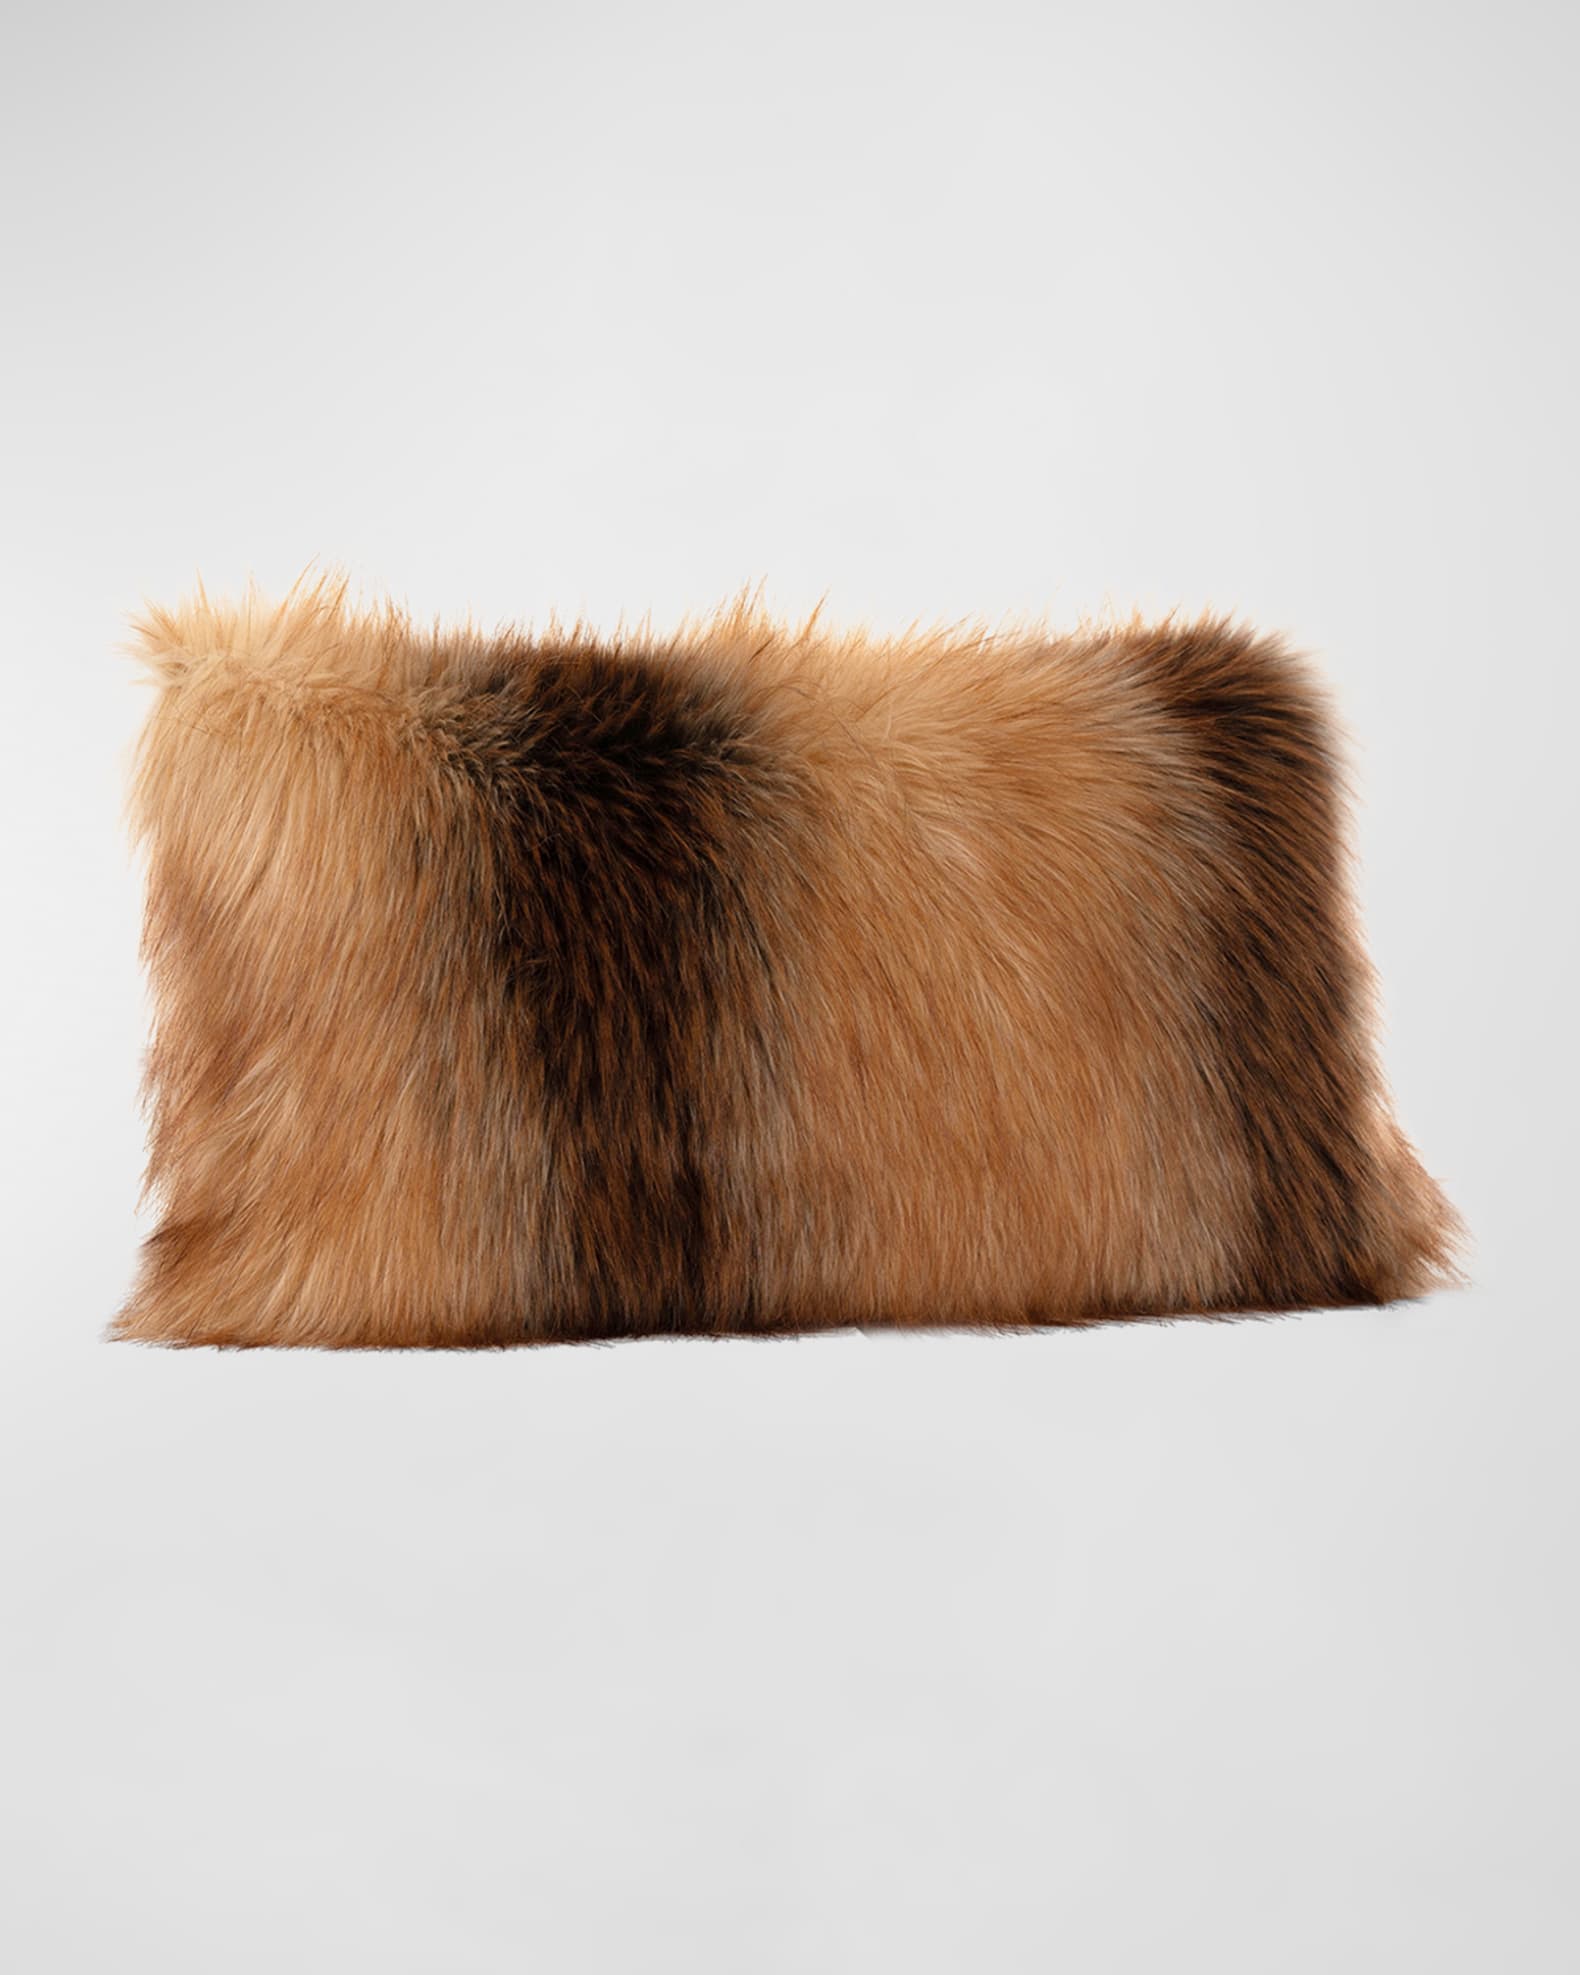 Fabulous Furs Limited Edition Pillow, 12" x 22"